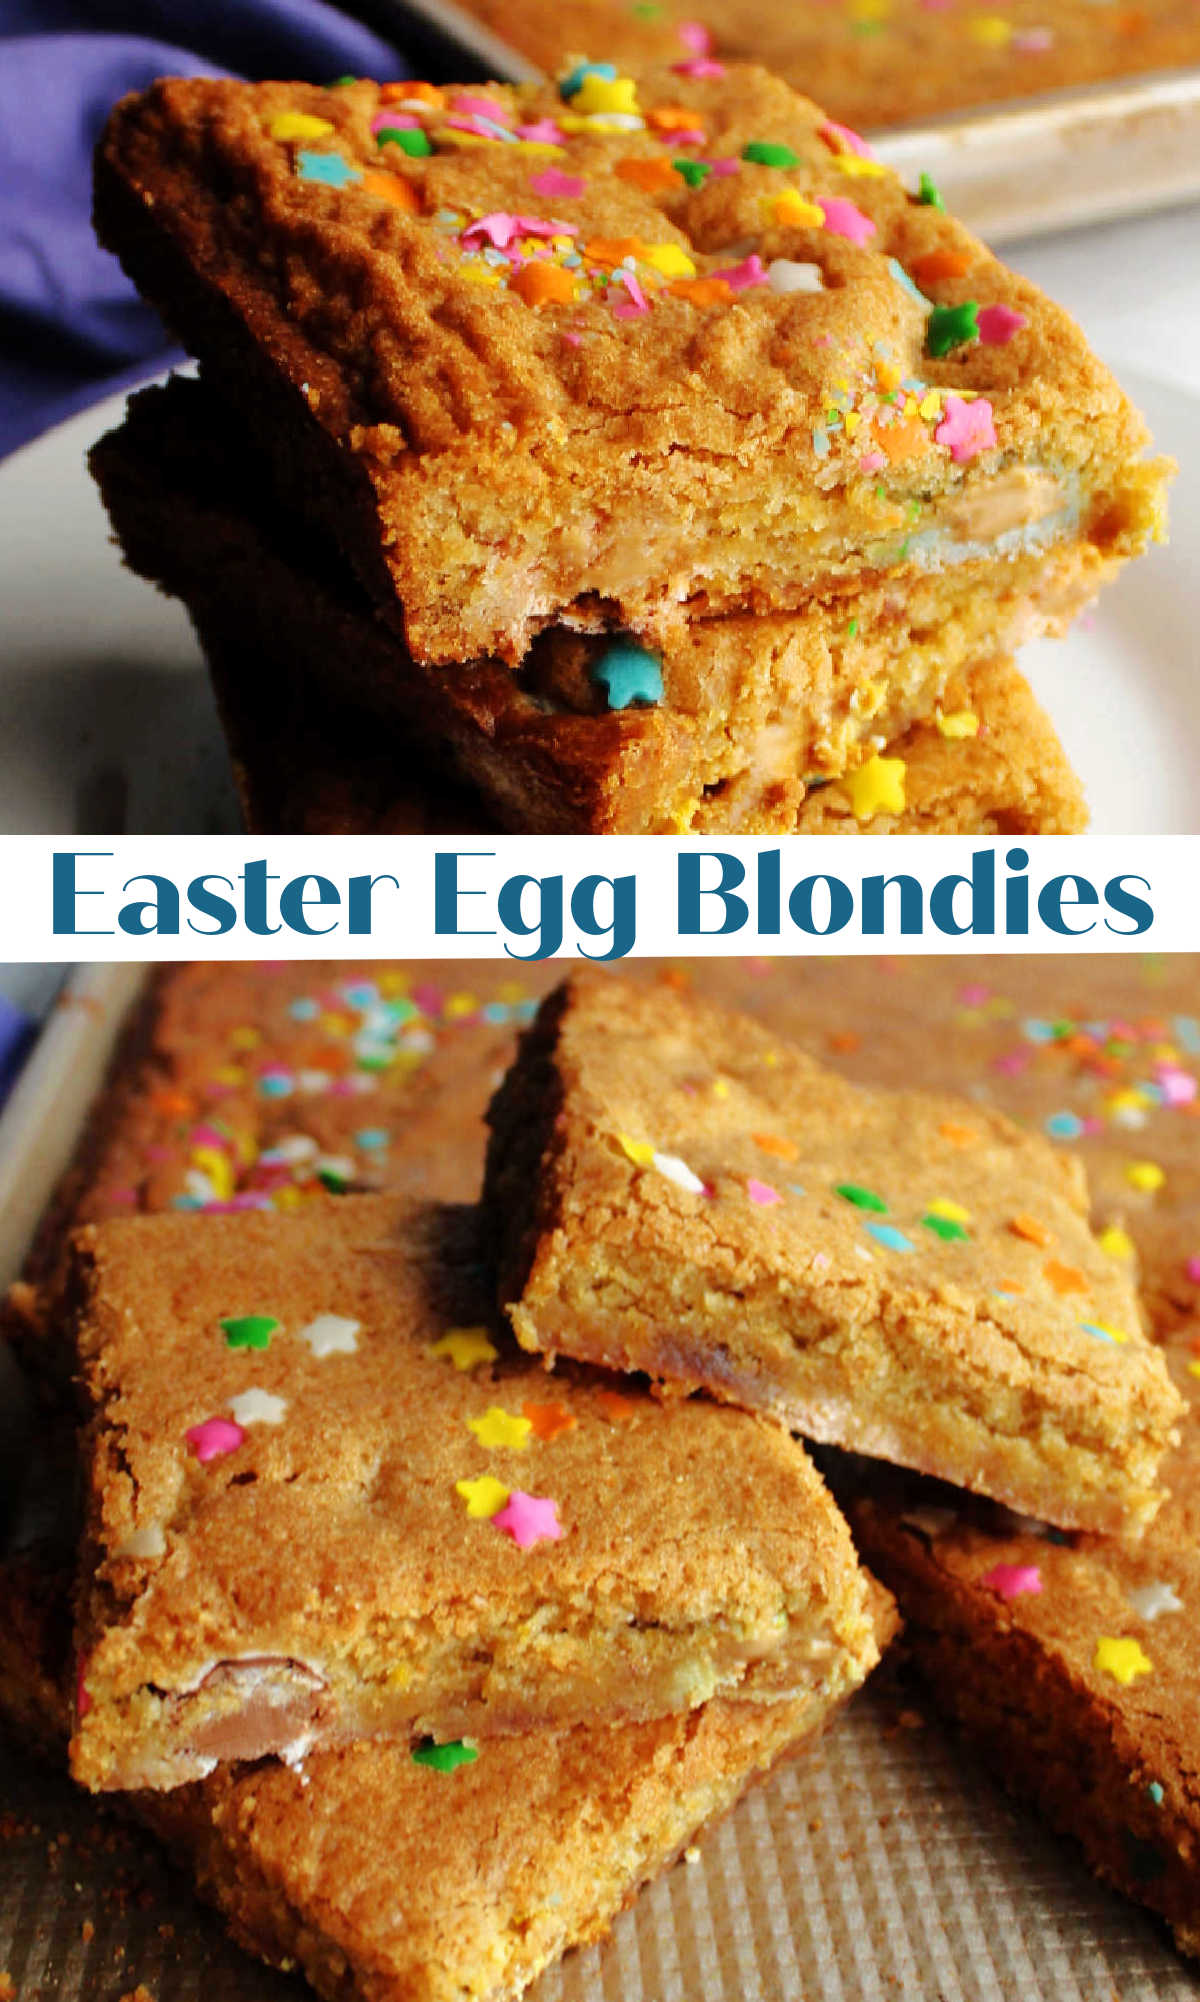 Blondies are the brown sugar and vanilla cousin to blondies.  This recipe is perfect for your Easter crowd. They are filled with fun candies and topped with sprinkles. The batter comes together really quickly and your friends and family will love them!